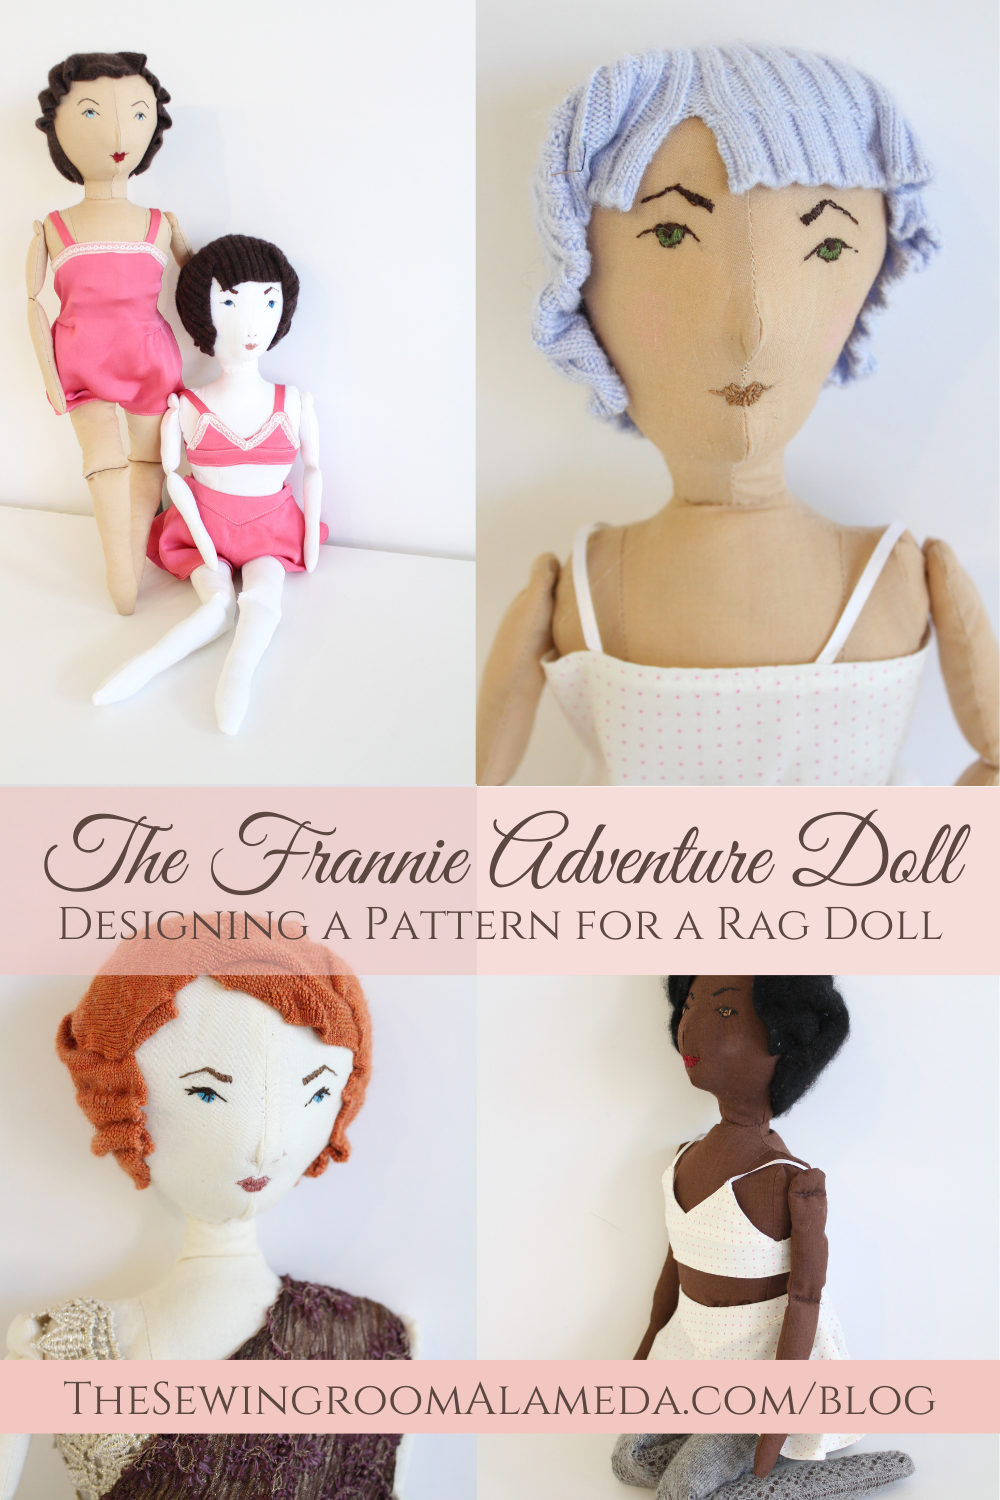 The Sewing Room Vintage Style Sewing and Fashion Blog - The Frannie  Adventure Doll - Designing a Rag Doll